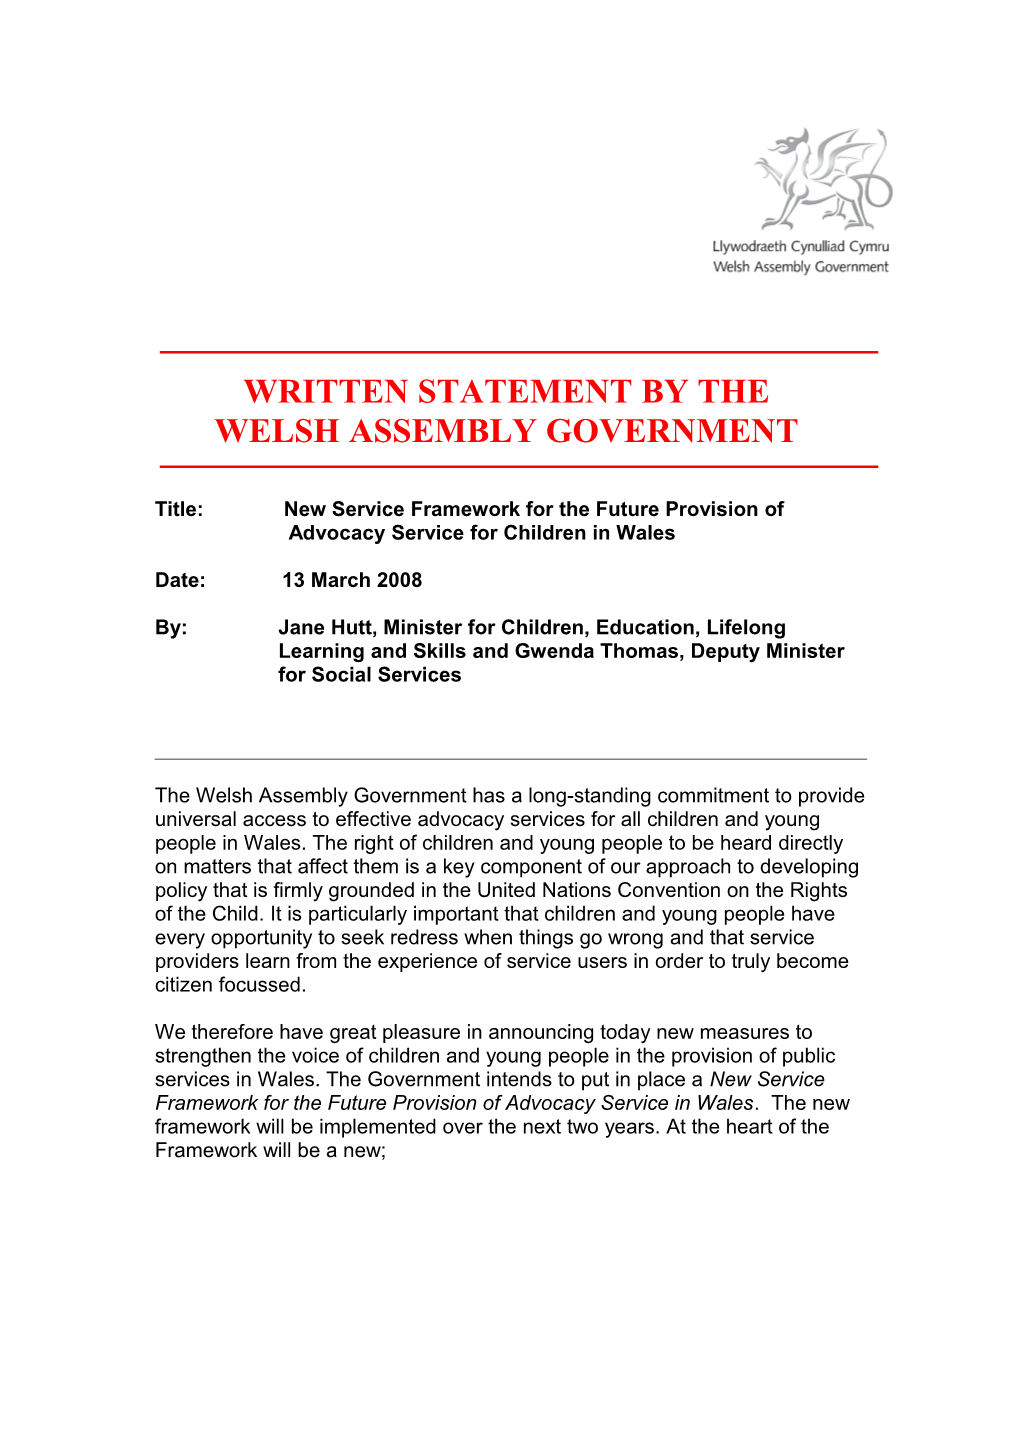 Written Statement by The